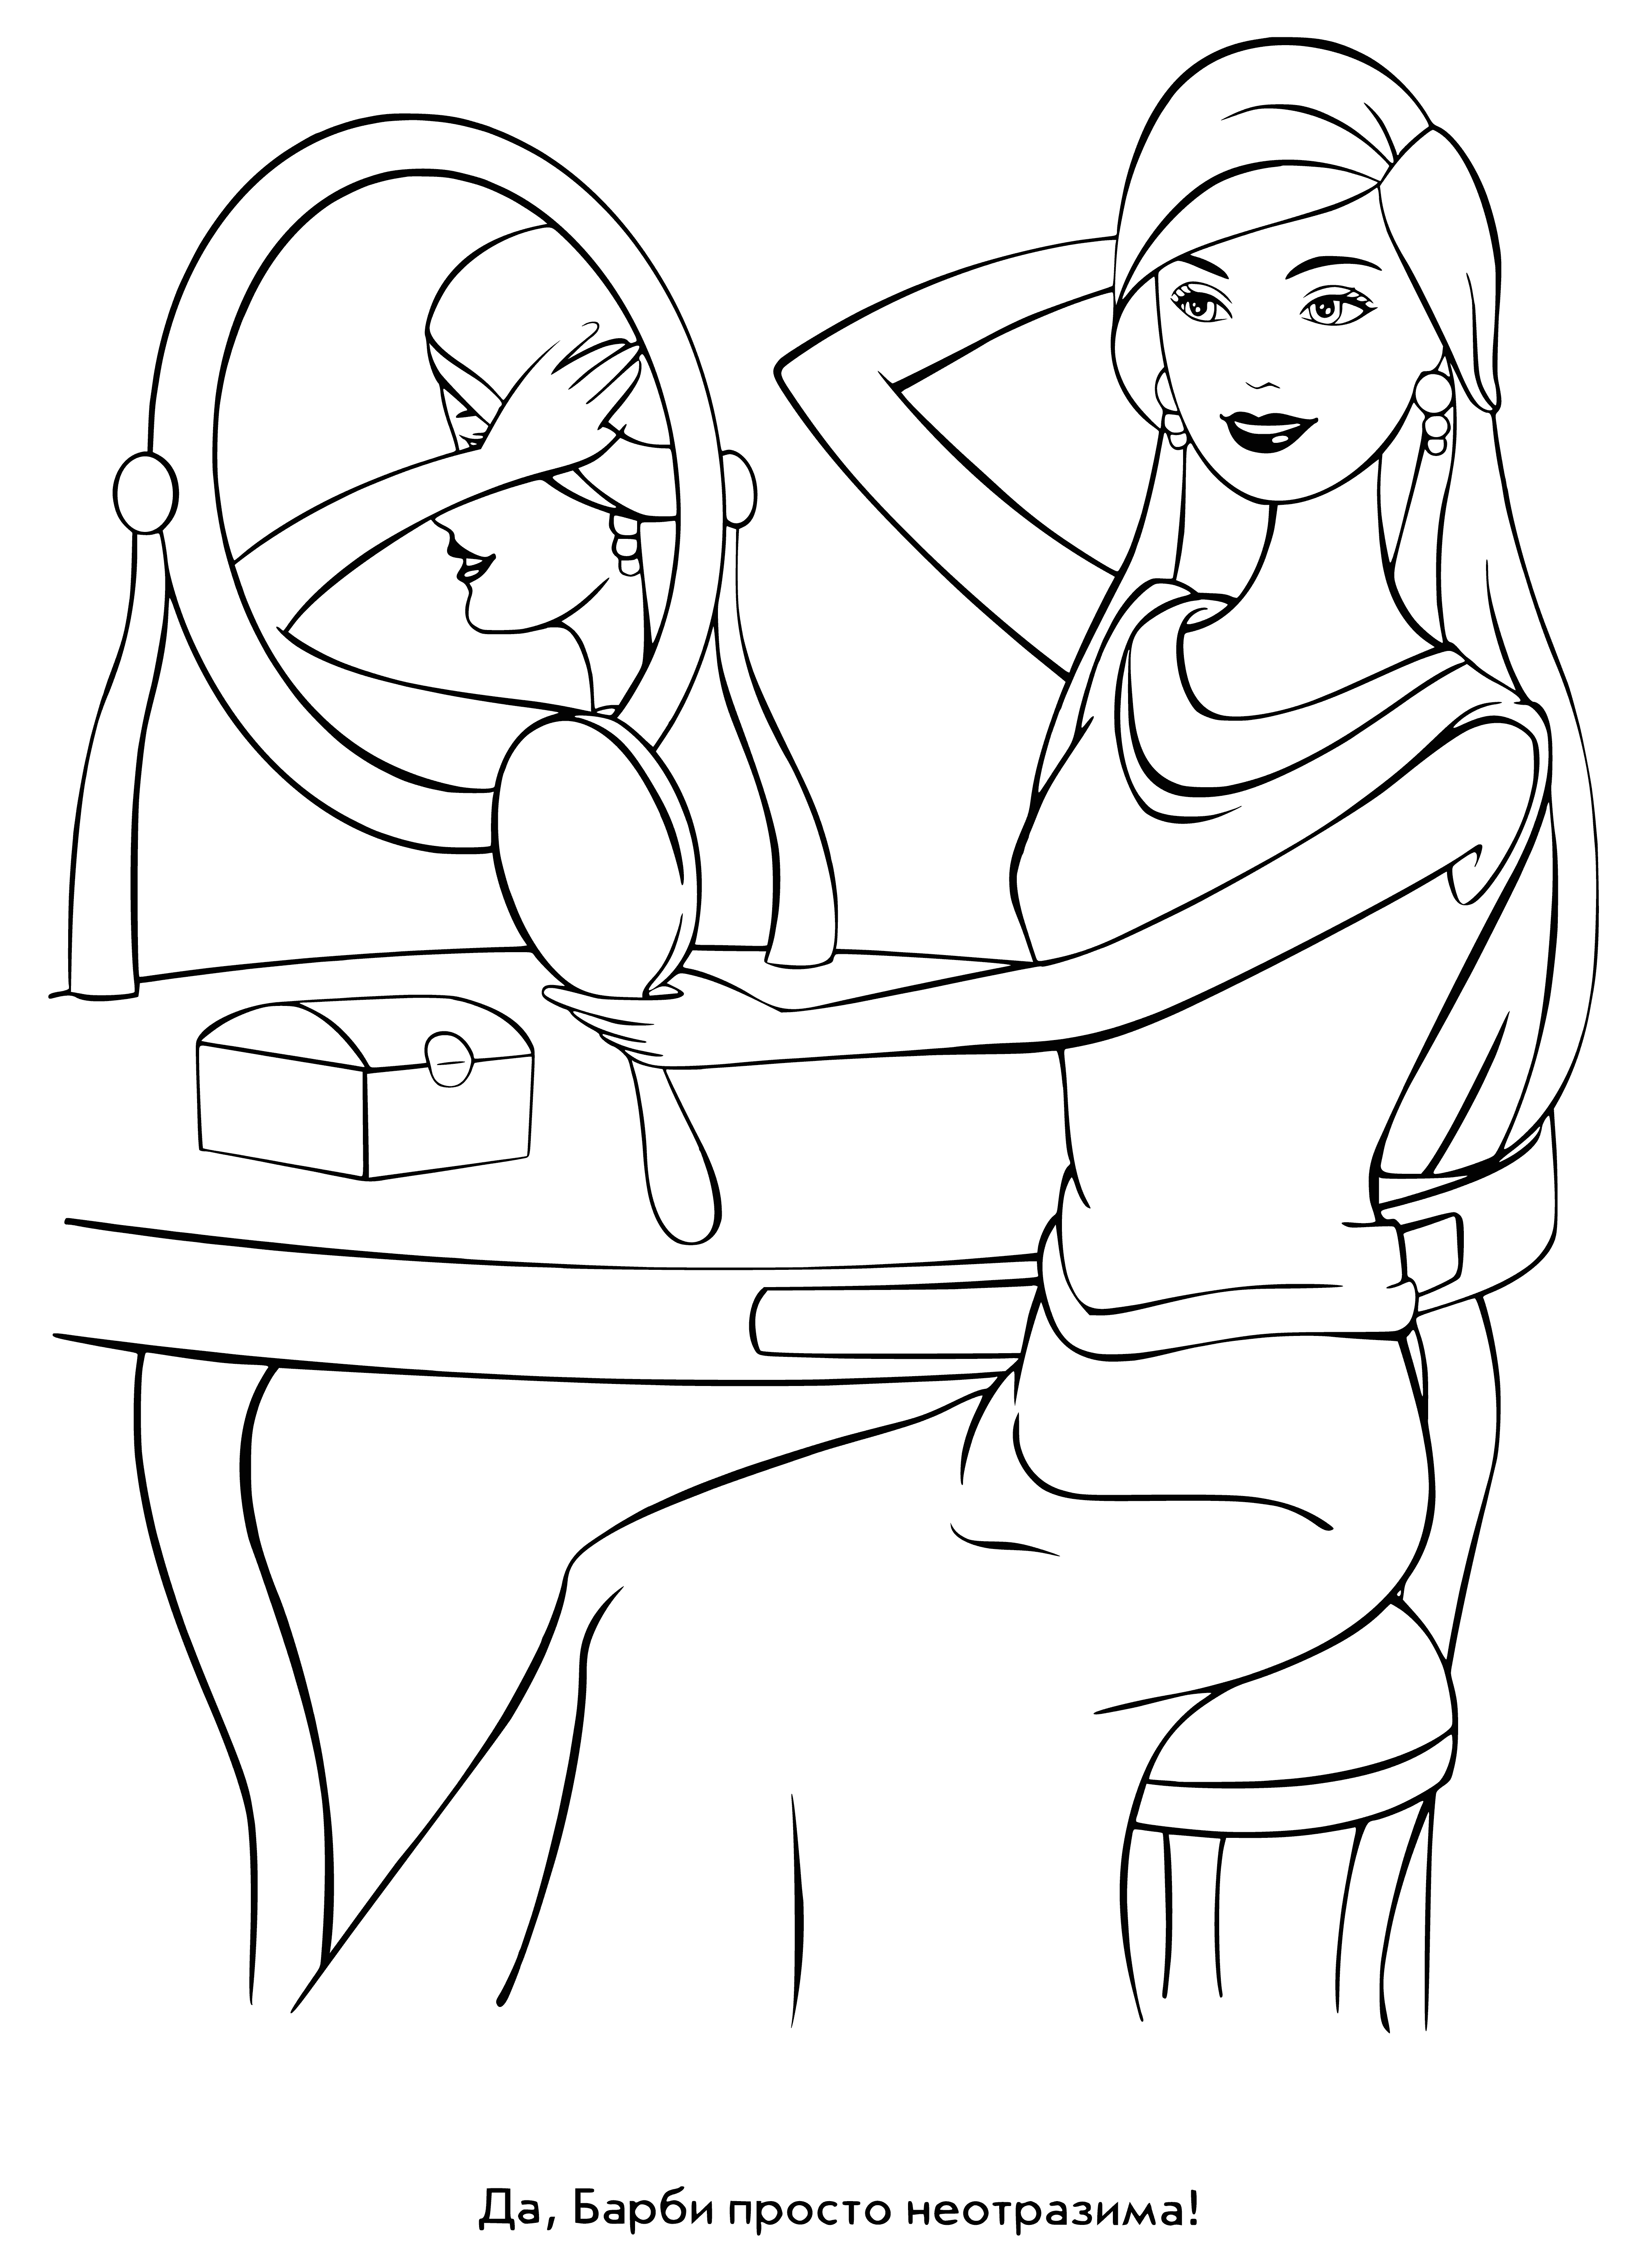 coloring page: Barbie admires her reflection in the mirror: blonde hair, blue eyes, pink dress, holding a brush.